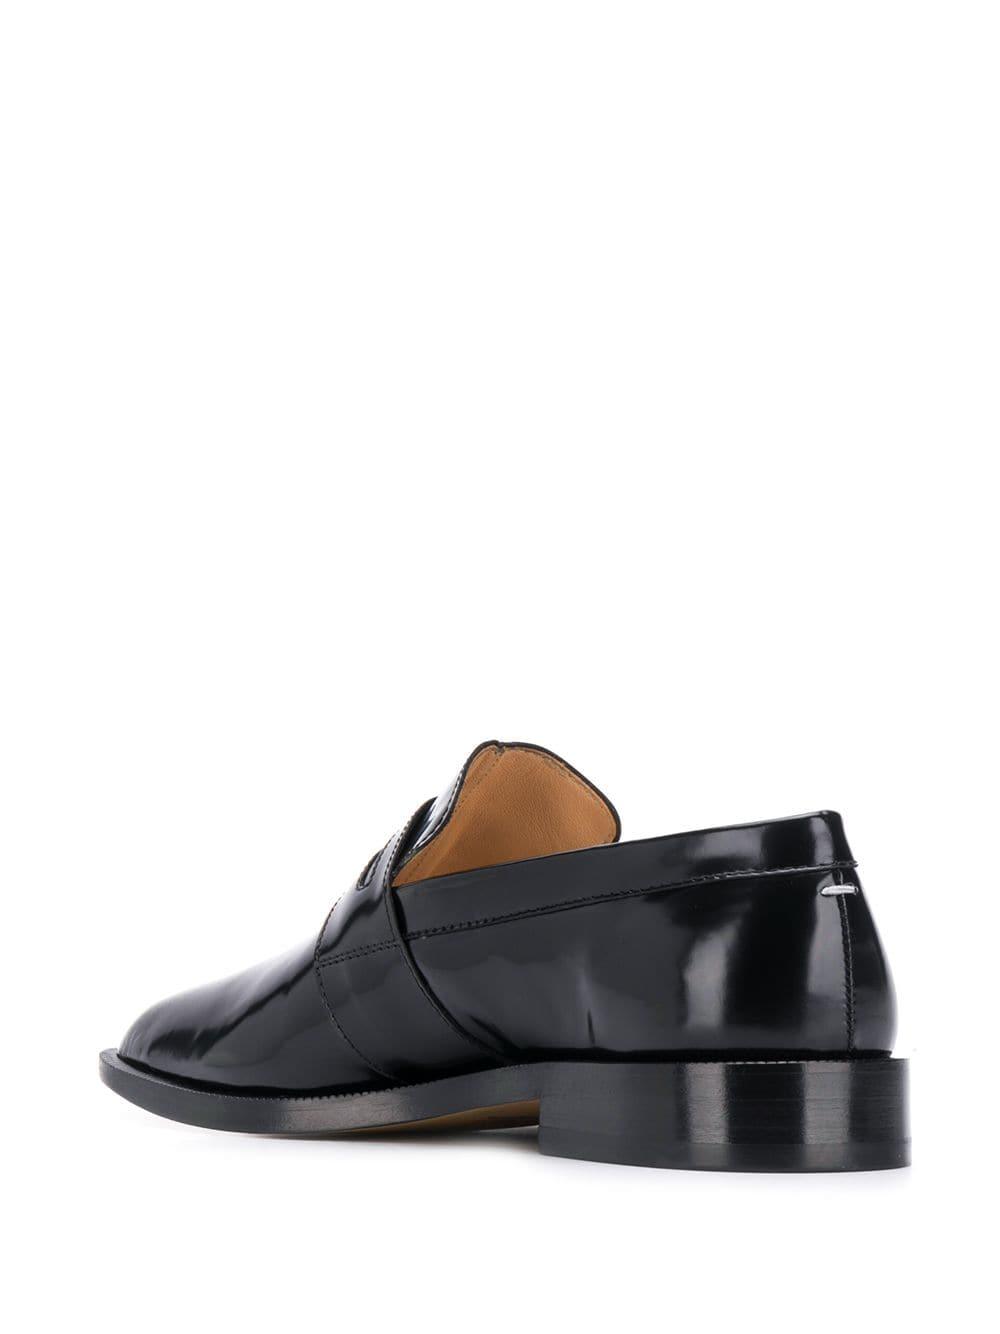 Maison Margiela Leather Tabi Penny Loafers in Black - Save 28% - Lyst